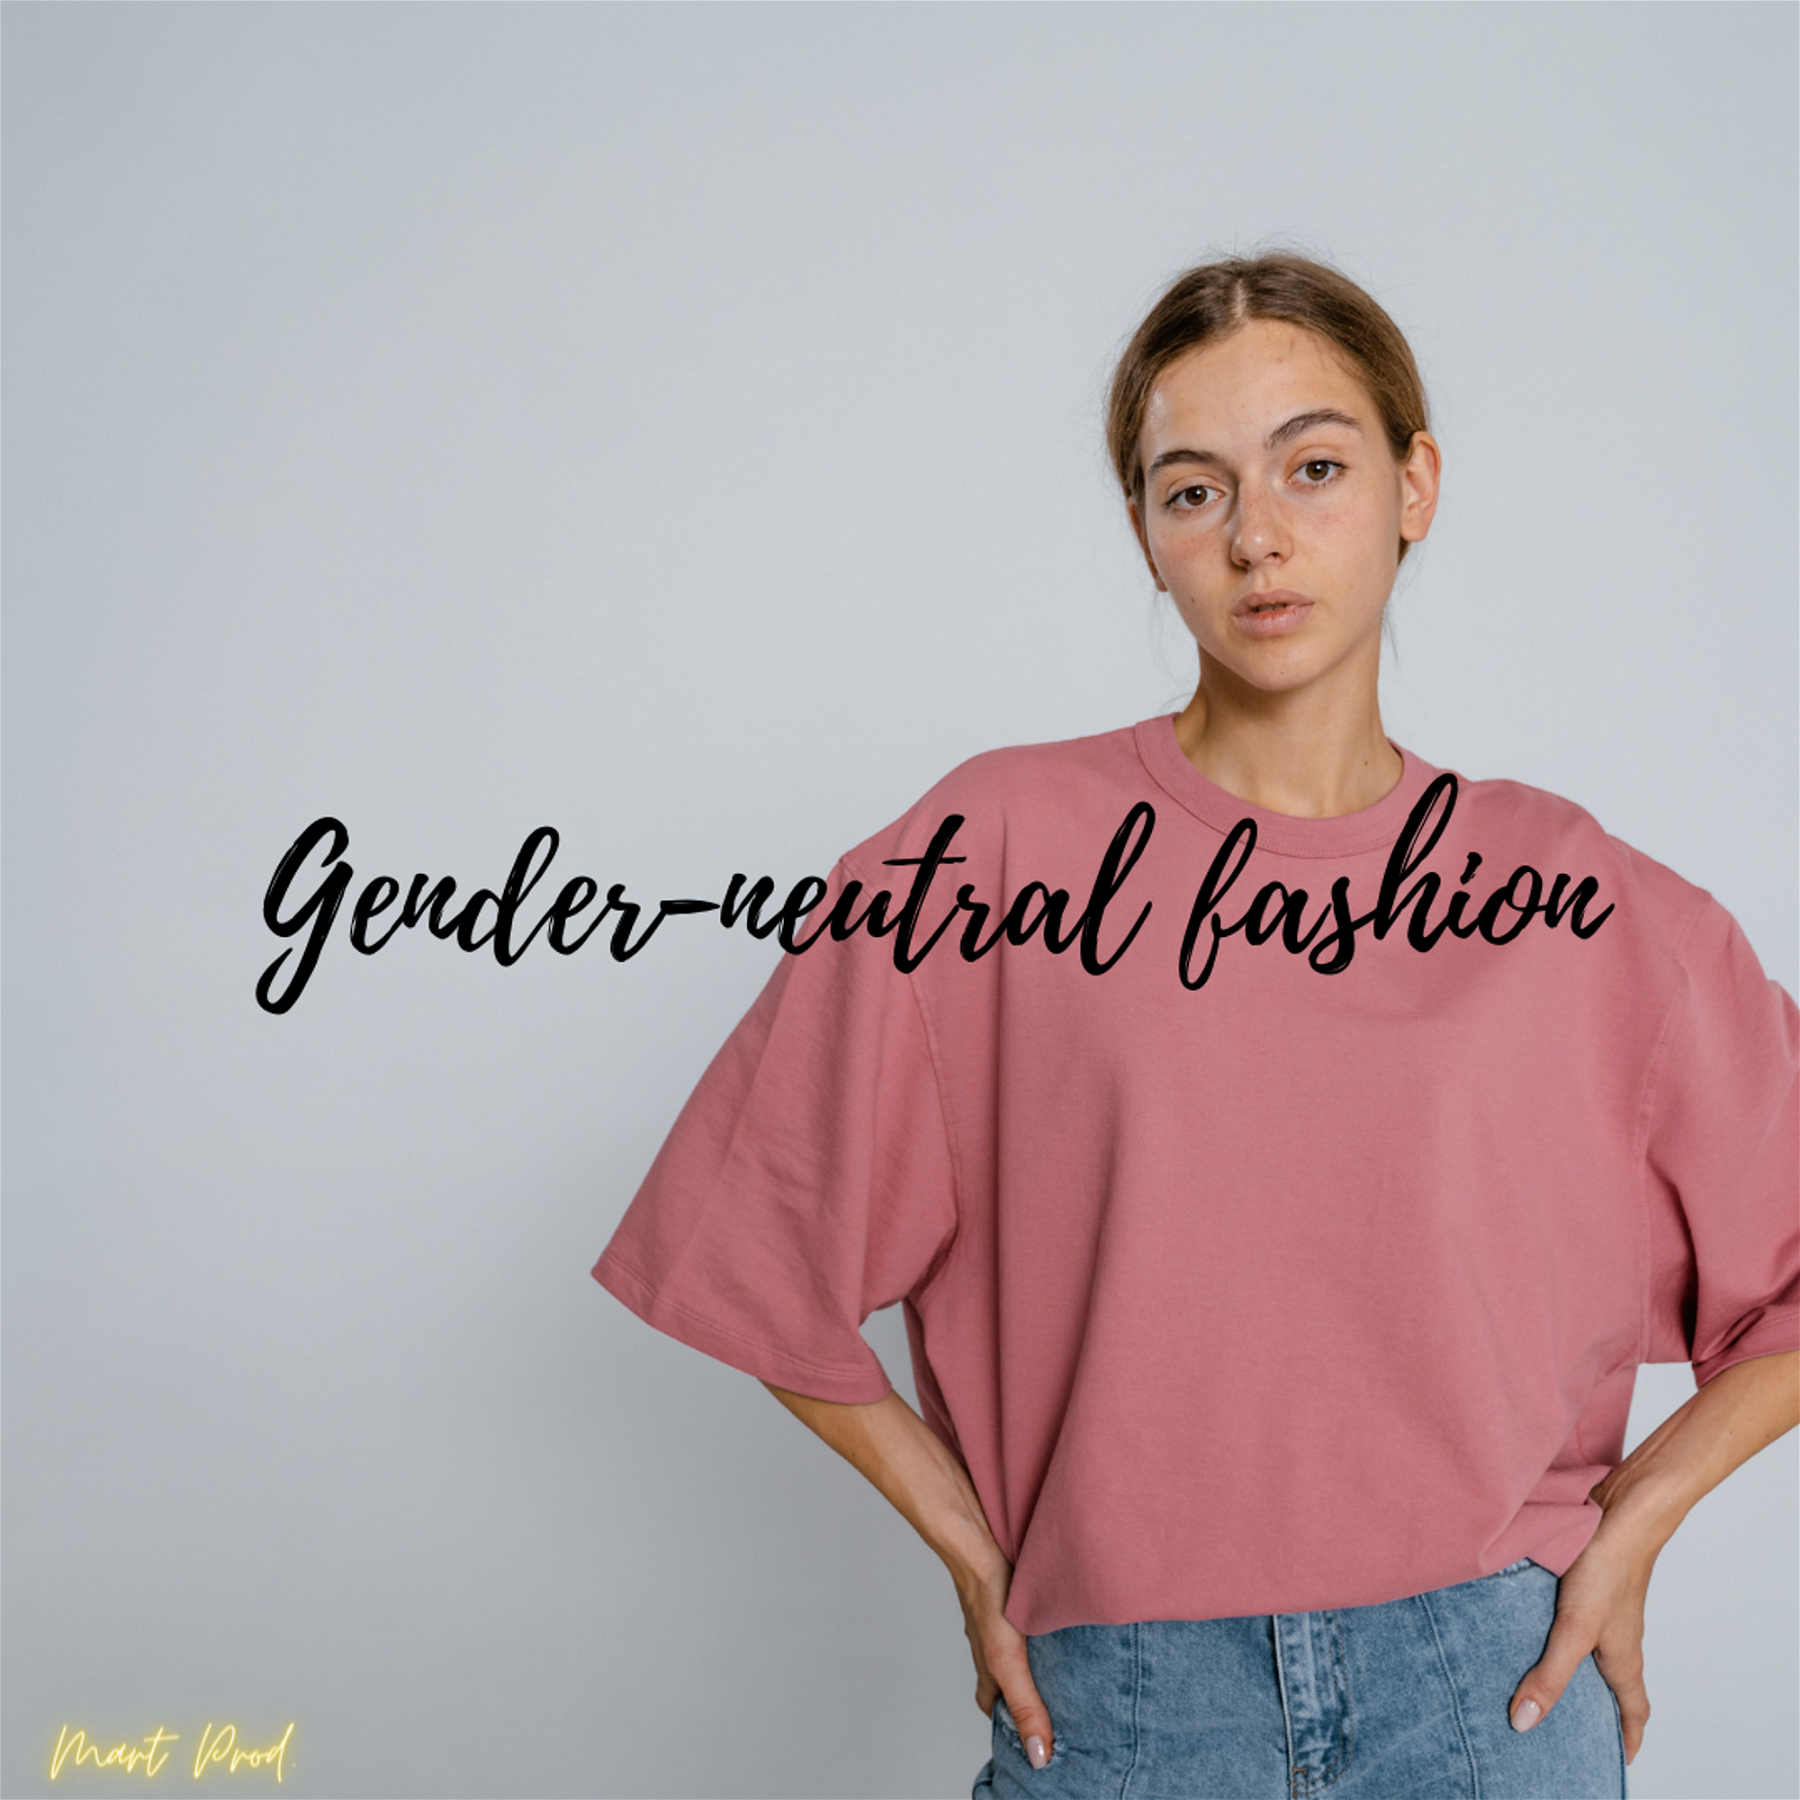 Gender-Neutral Fashion and Inclusivity in the Industry